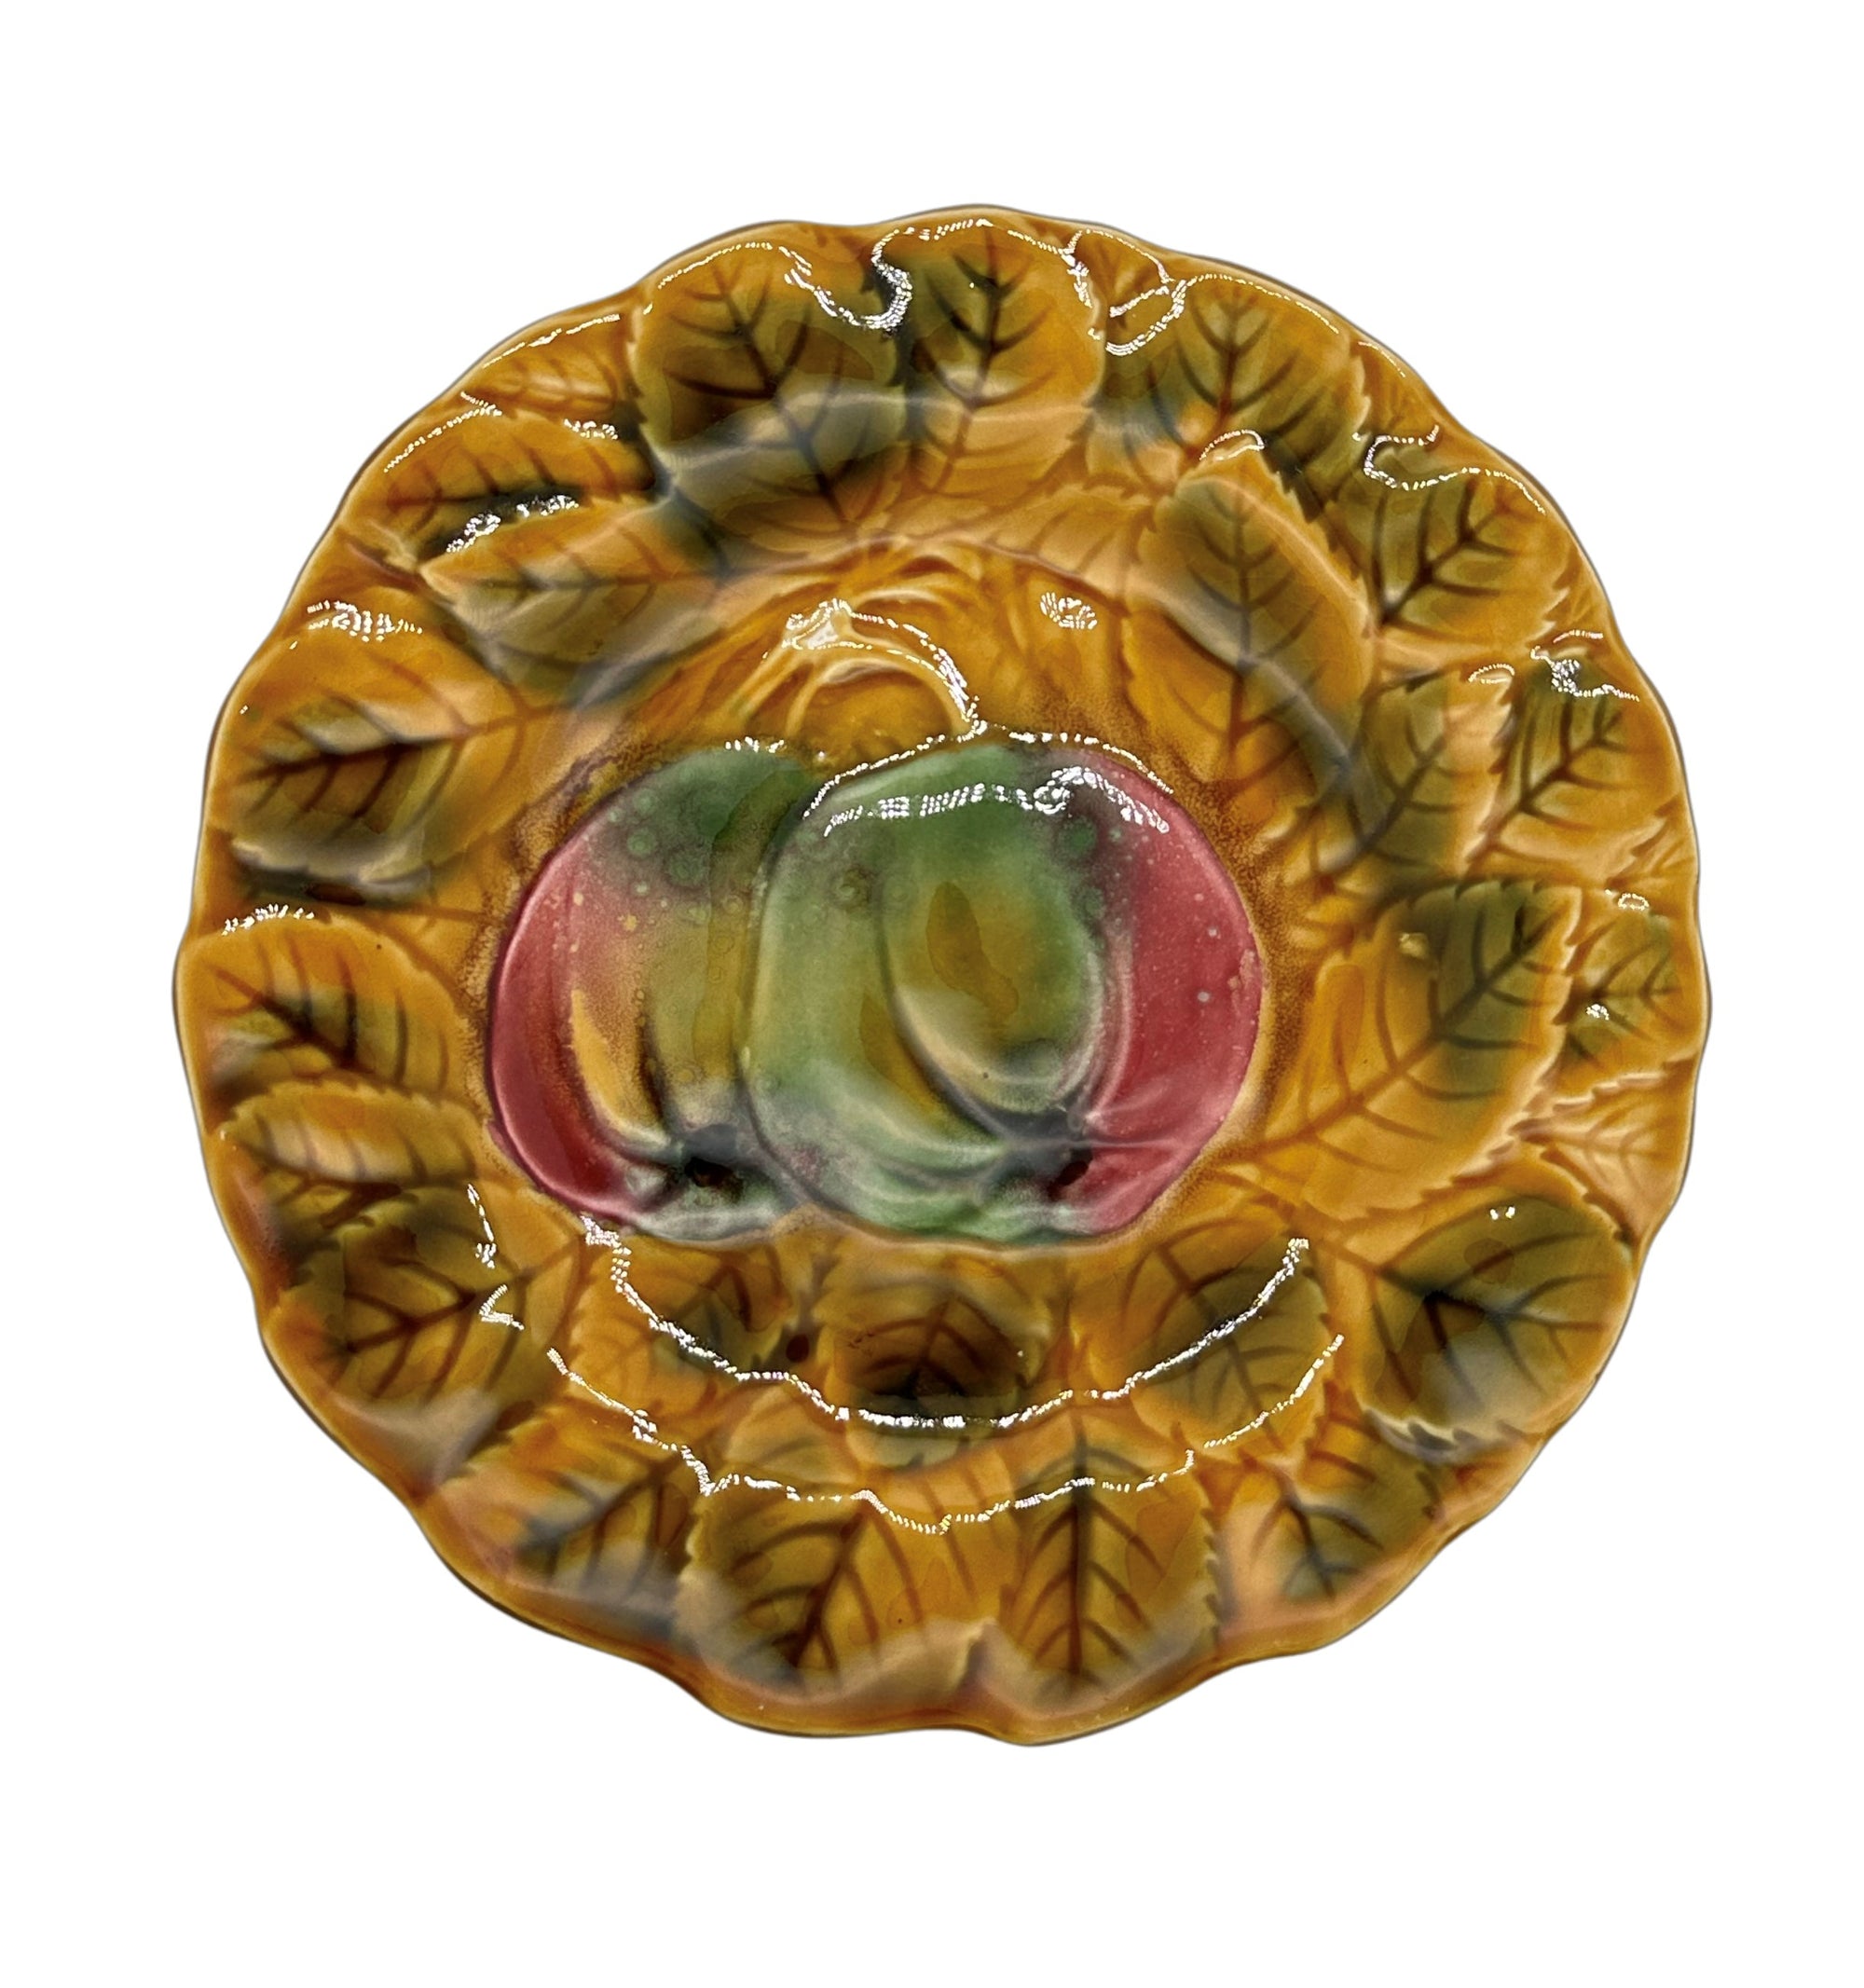 Vintage French Apple in the Middle Majolica Plate